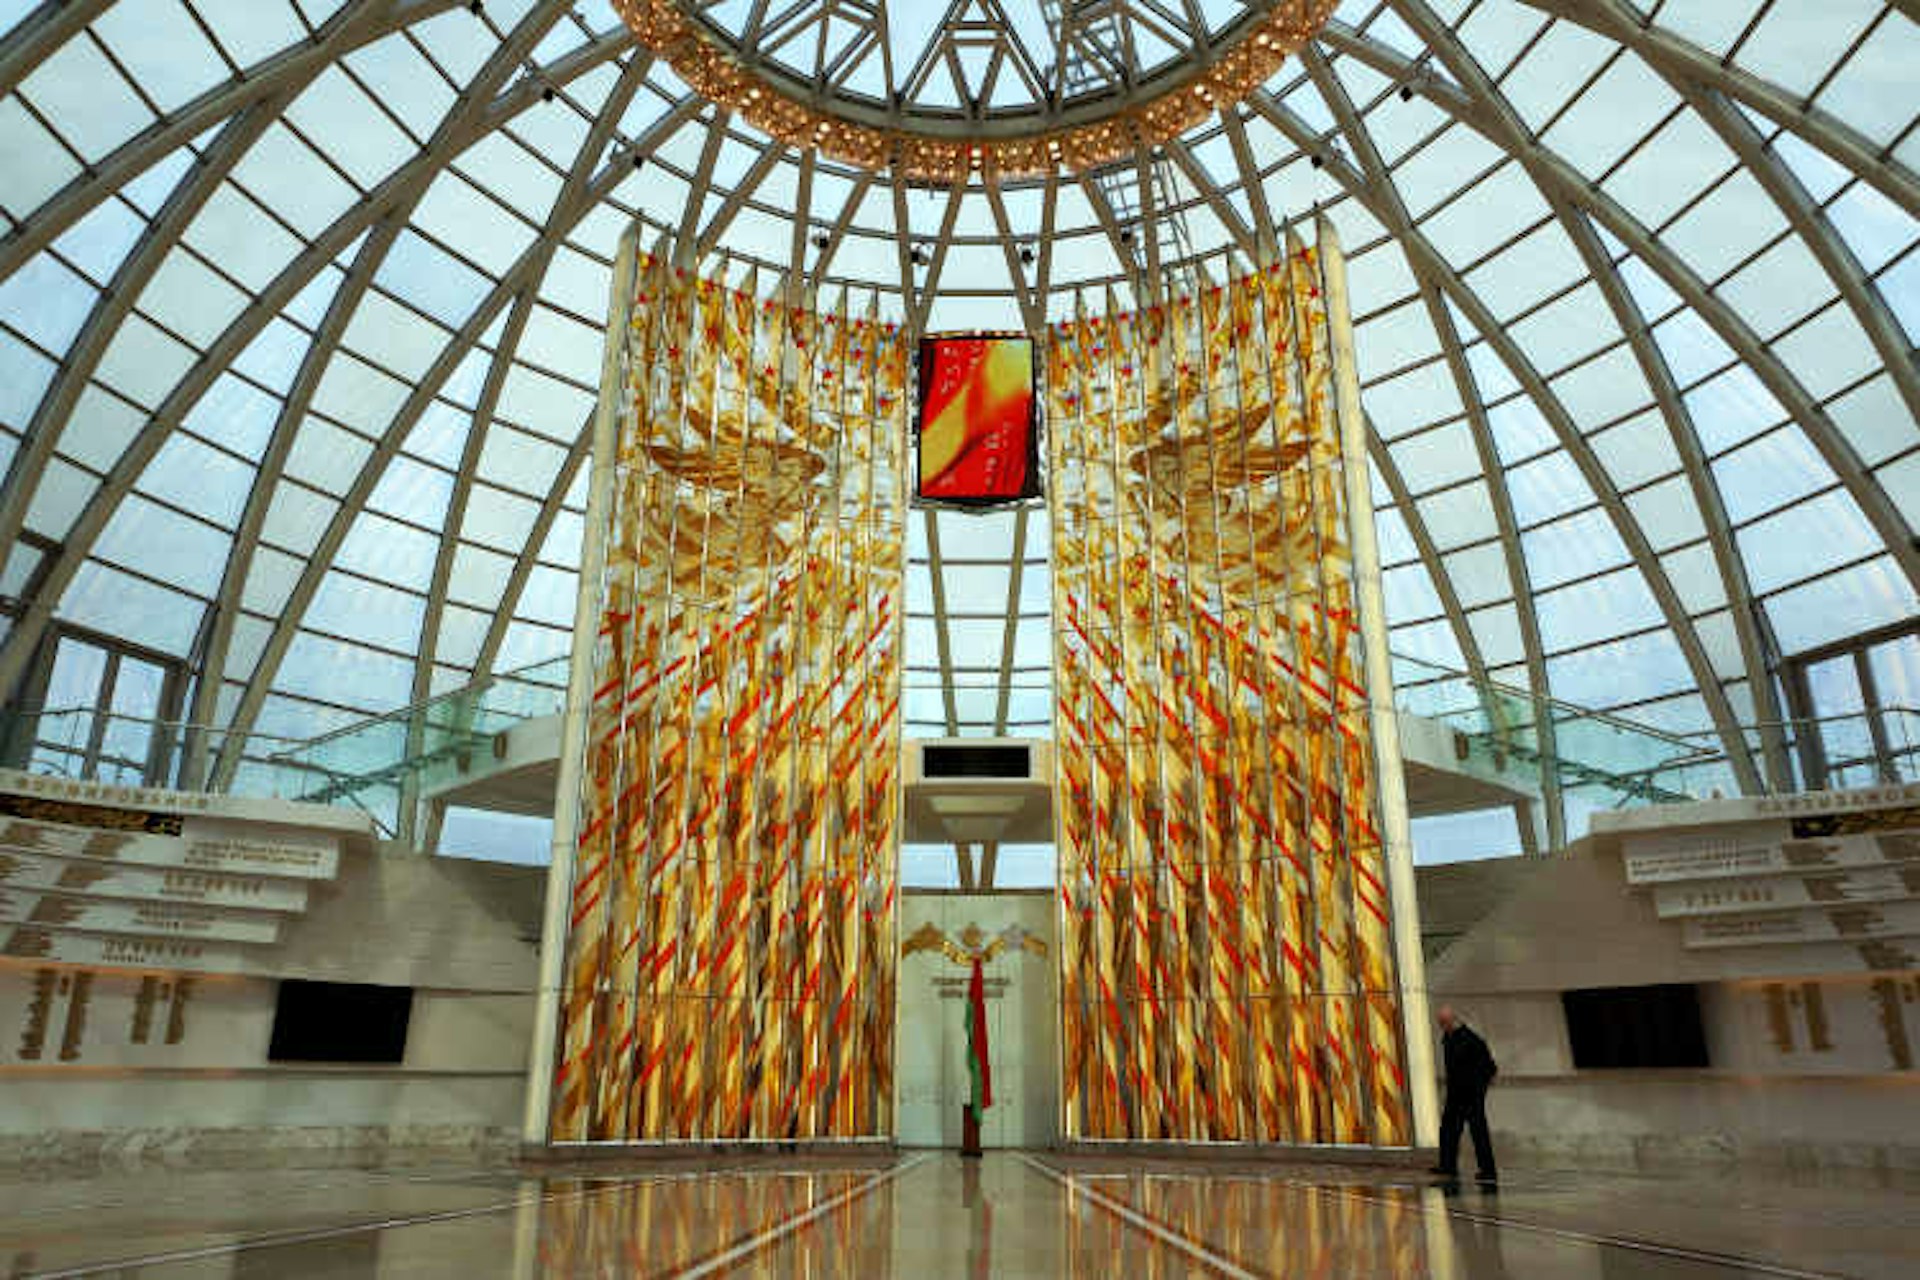 The Hall of Victory in the Museum of the Great Patriotic War. Image by Anita Isalska / Lonely Planet